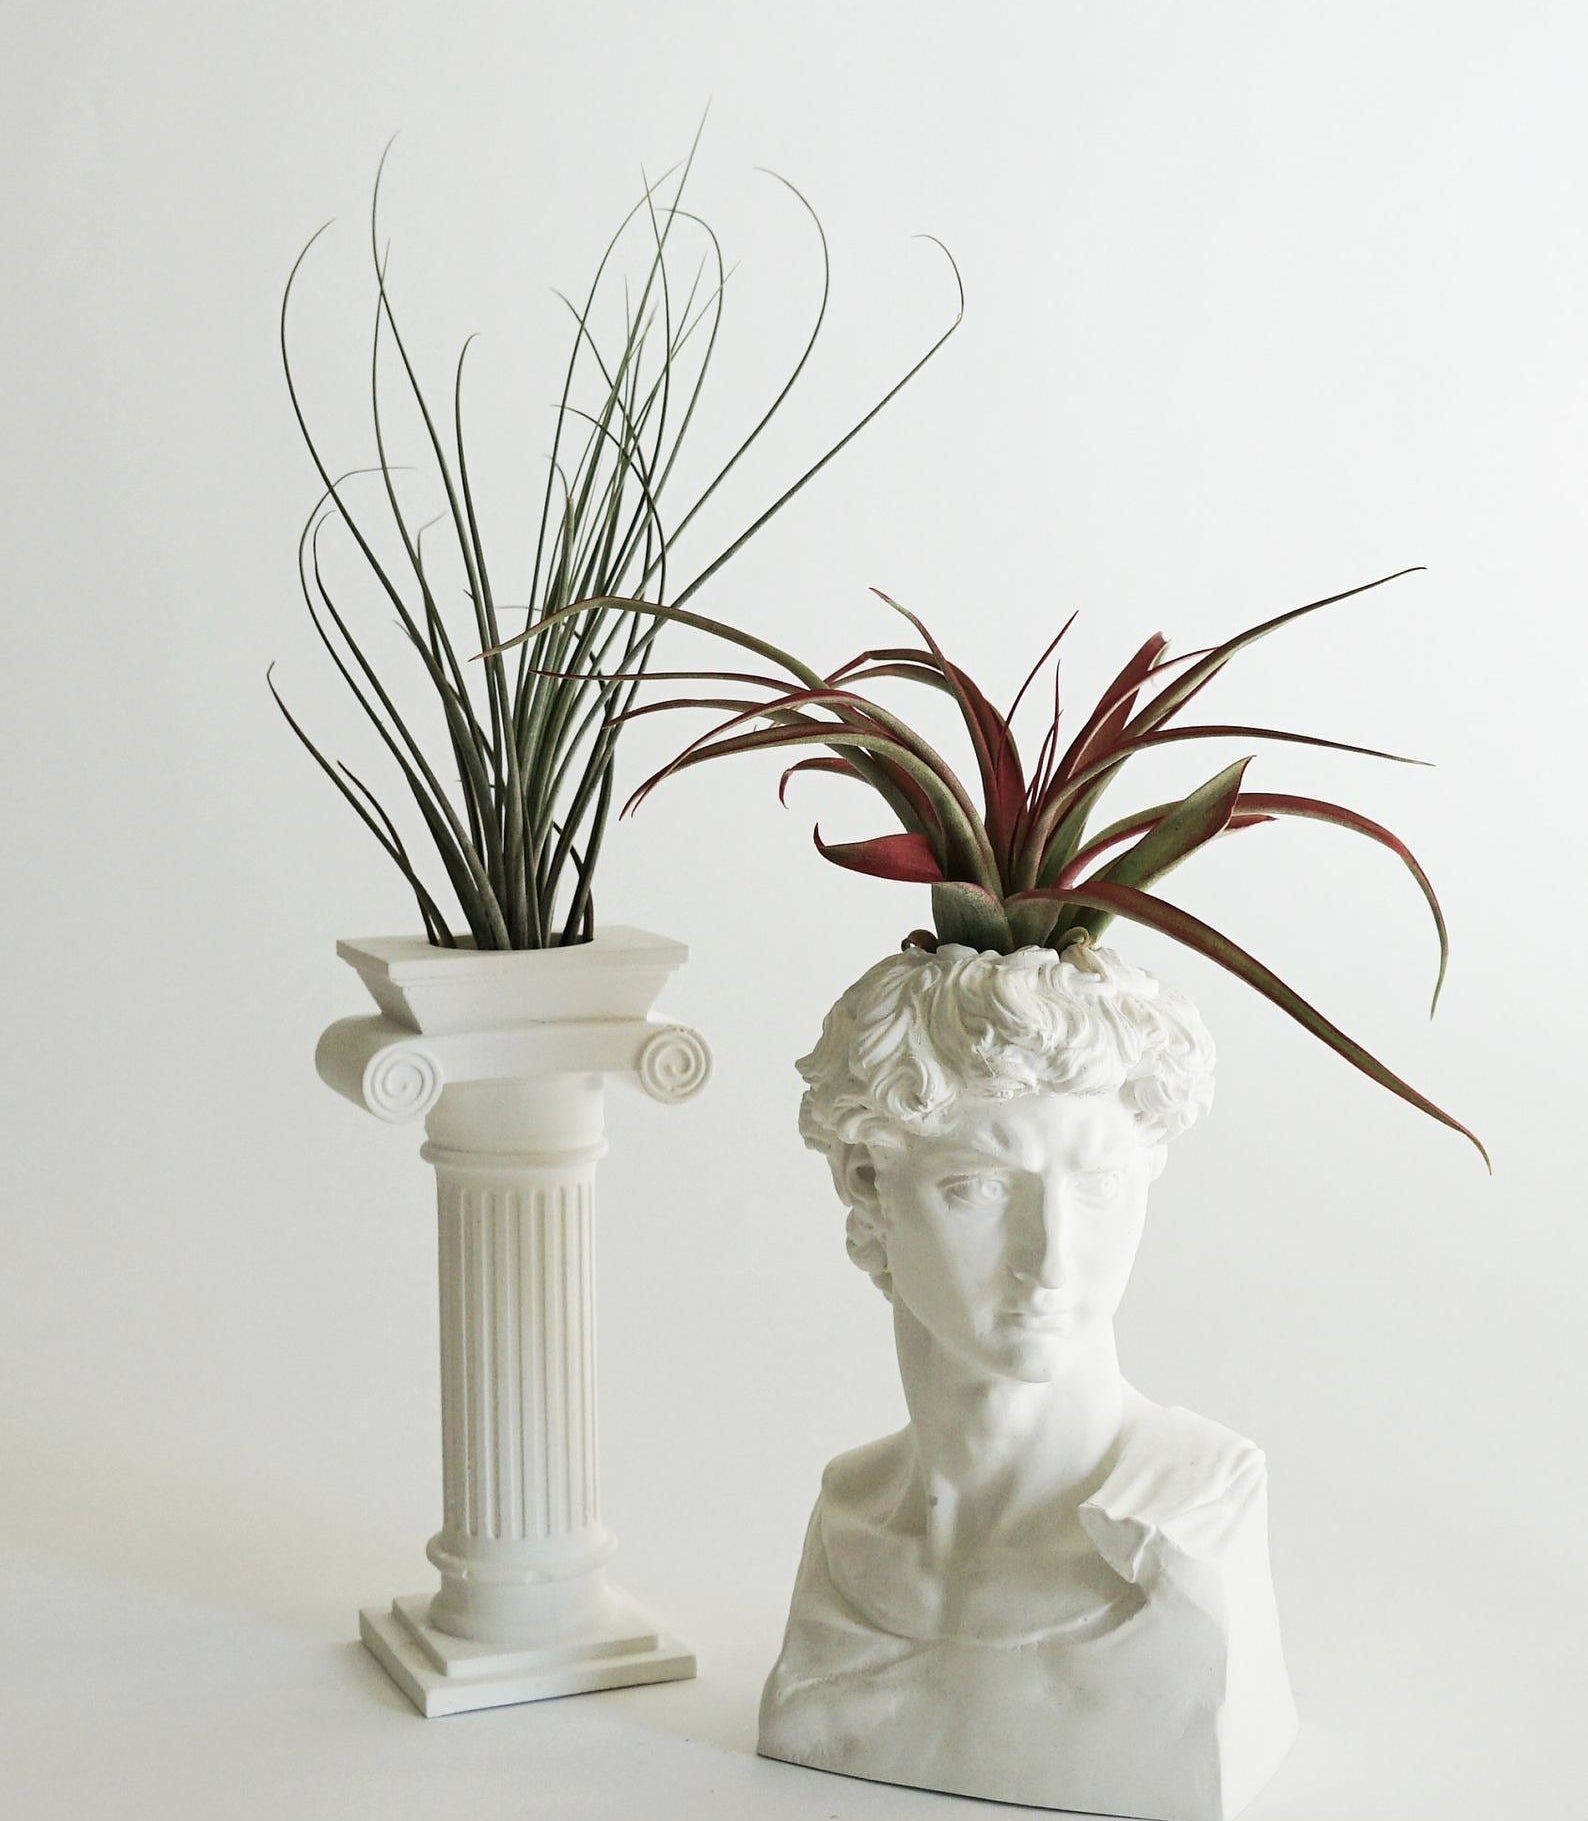 A planter shaped like a old Roman column with an air plant sprouting from it and an air plant inside of a buttress shaped like the head of the historical Michaelangelo sculpture, &quot;David&quot;